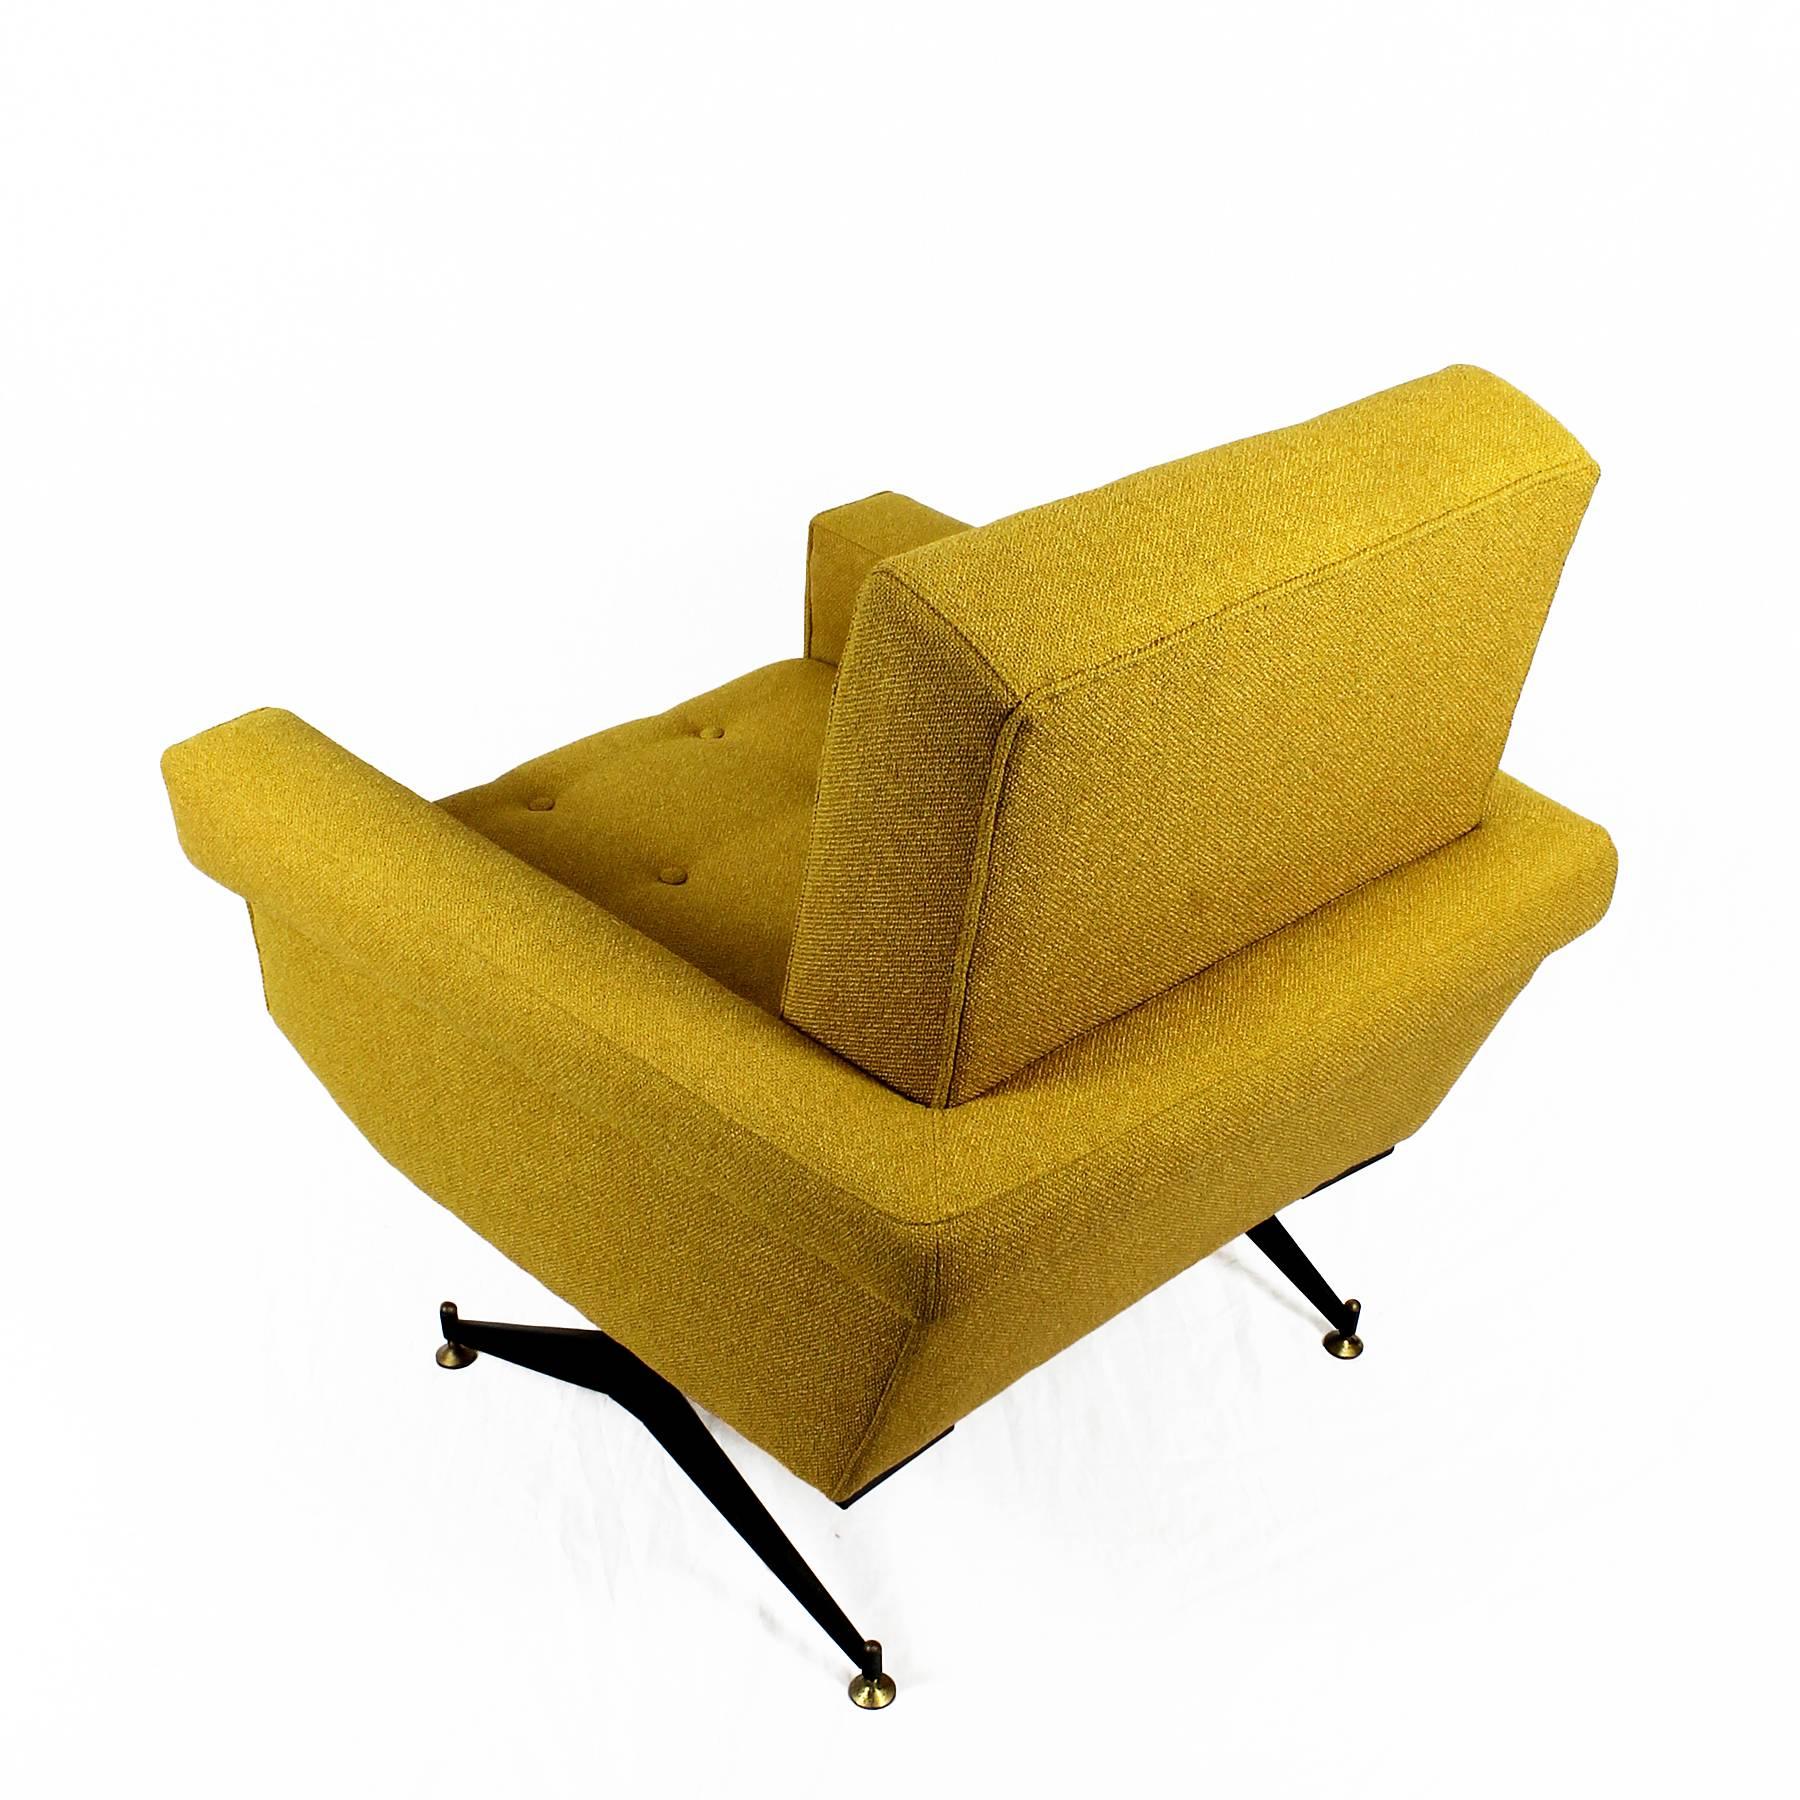 Pair of Mid-Century Modern Padded Armchairs With Yellow-Mustard Fabric - Italy For Sale 1